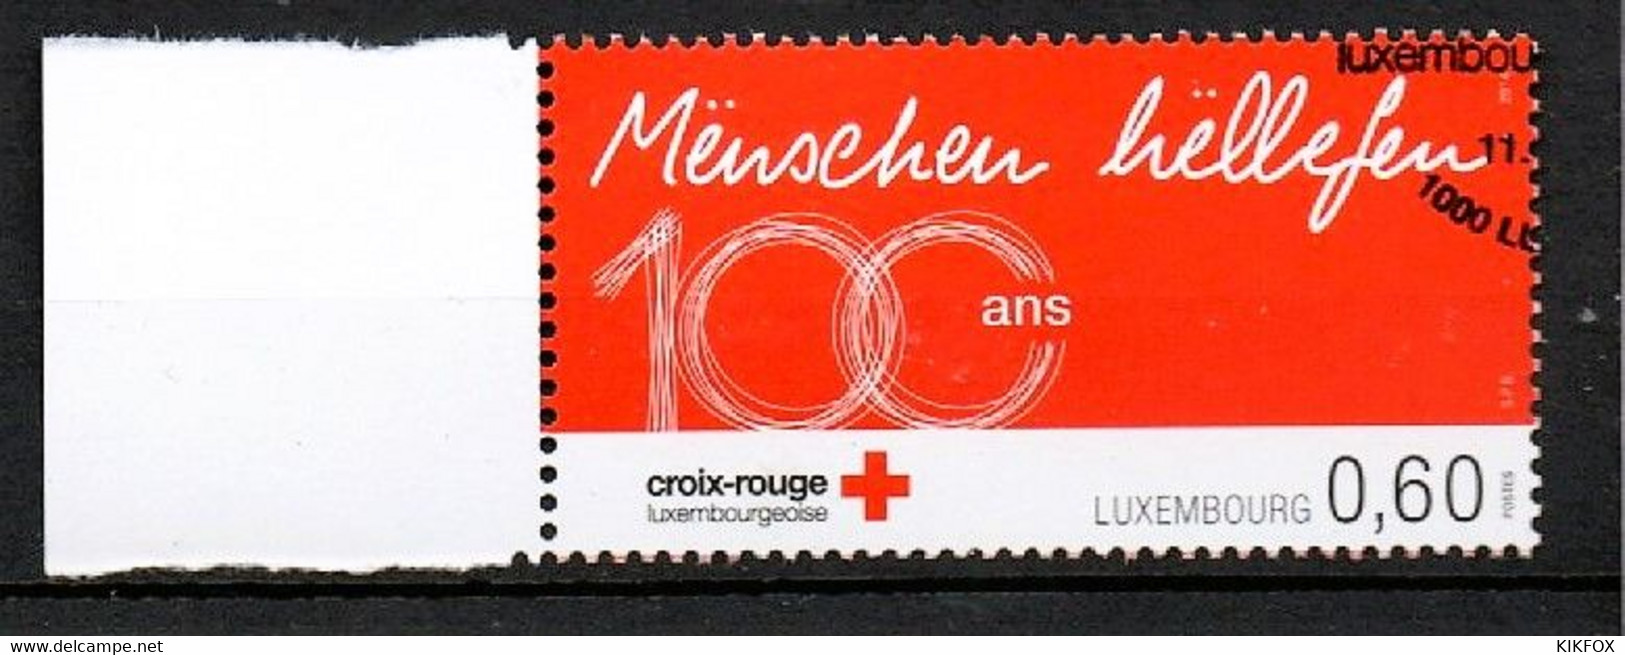 LUXEMBOURG, LUXEMBURG 2014, MI 2001 ,100 ANS CROIX -ROUGE,  ESST GESTEMPELT - Used Stamps